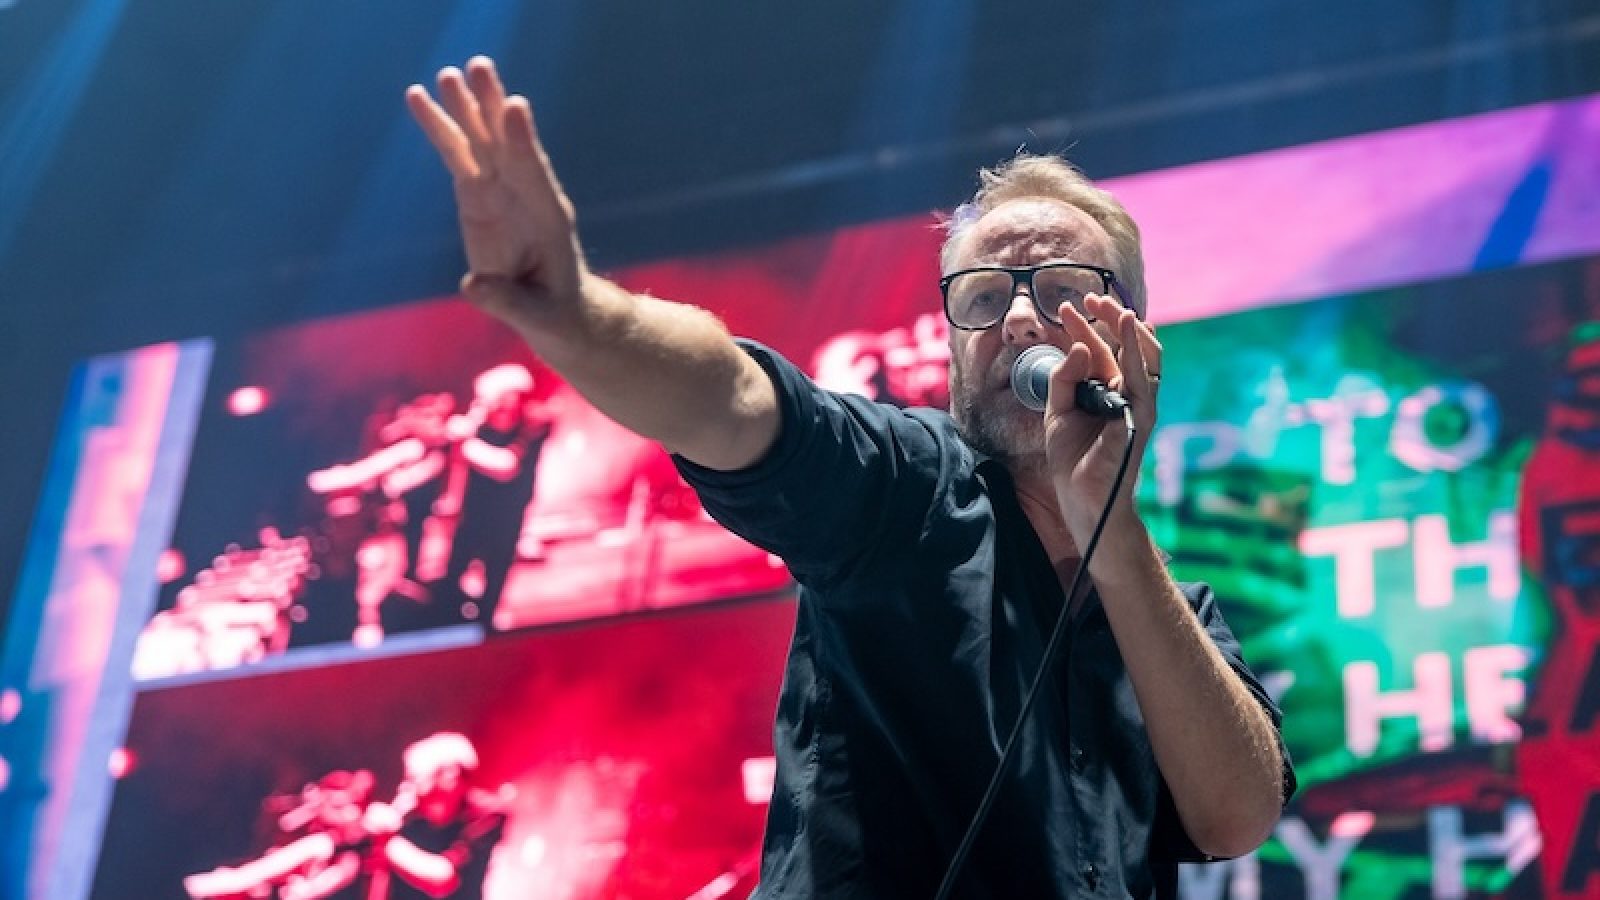 The National Concert In Lisbon